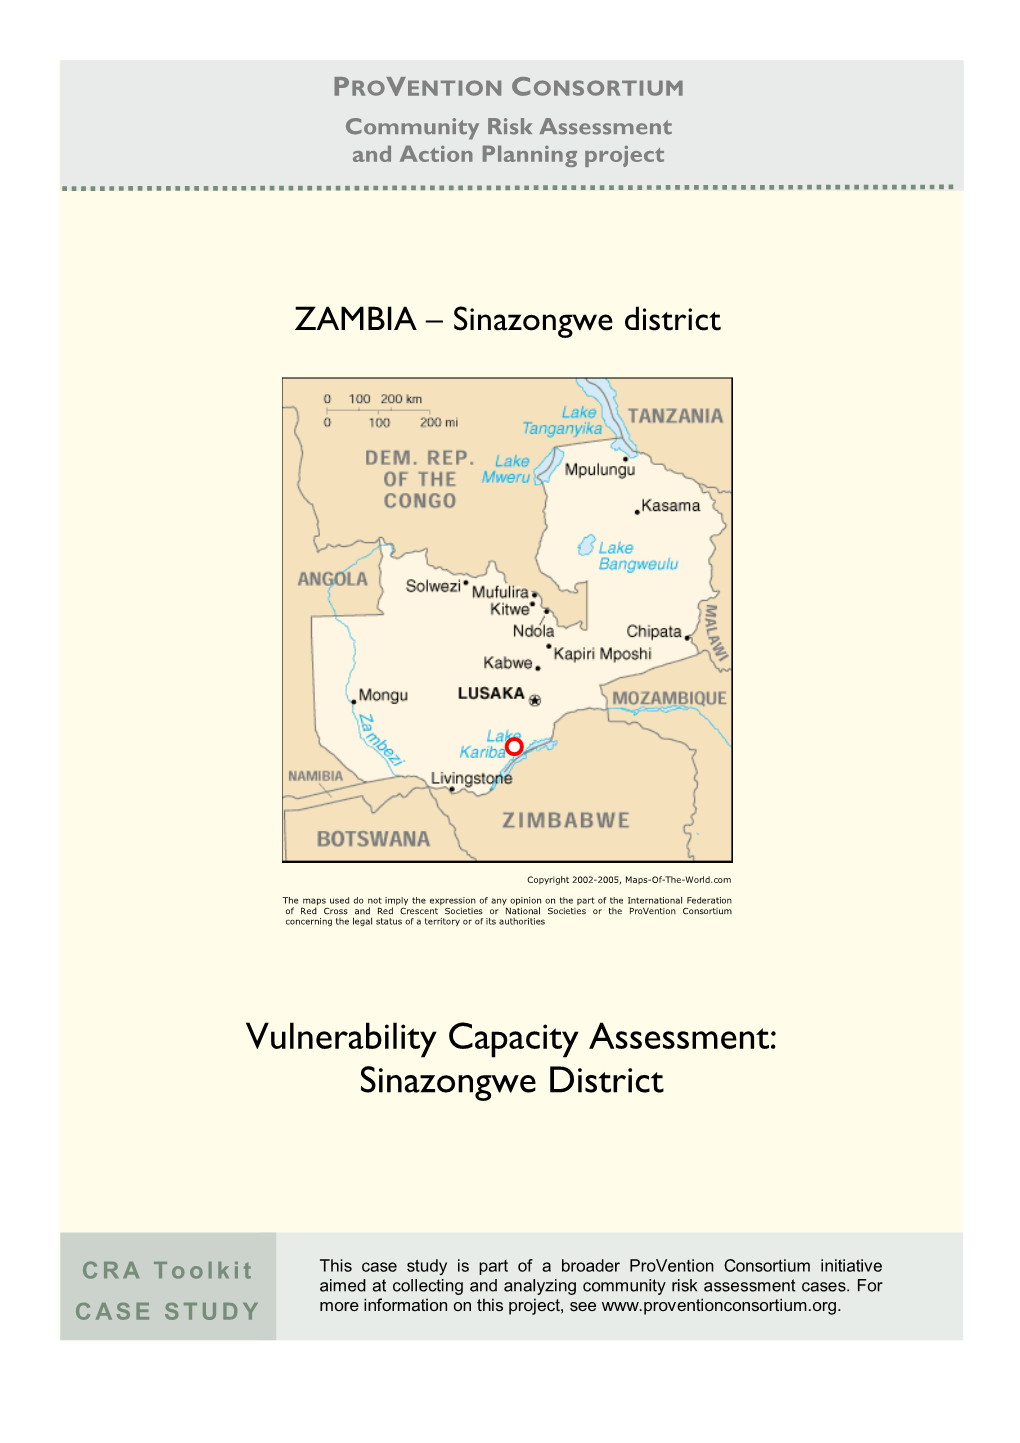 Vulnerability Capacity Assessment: Sinazongwe District